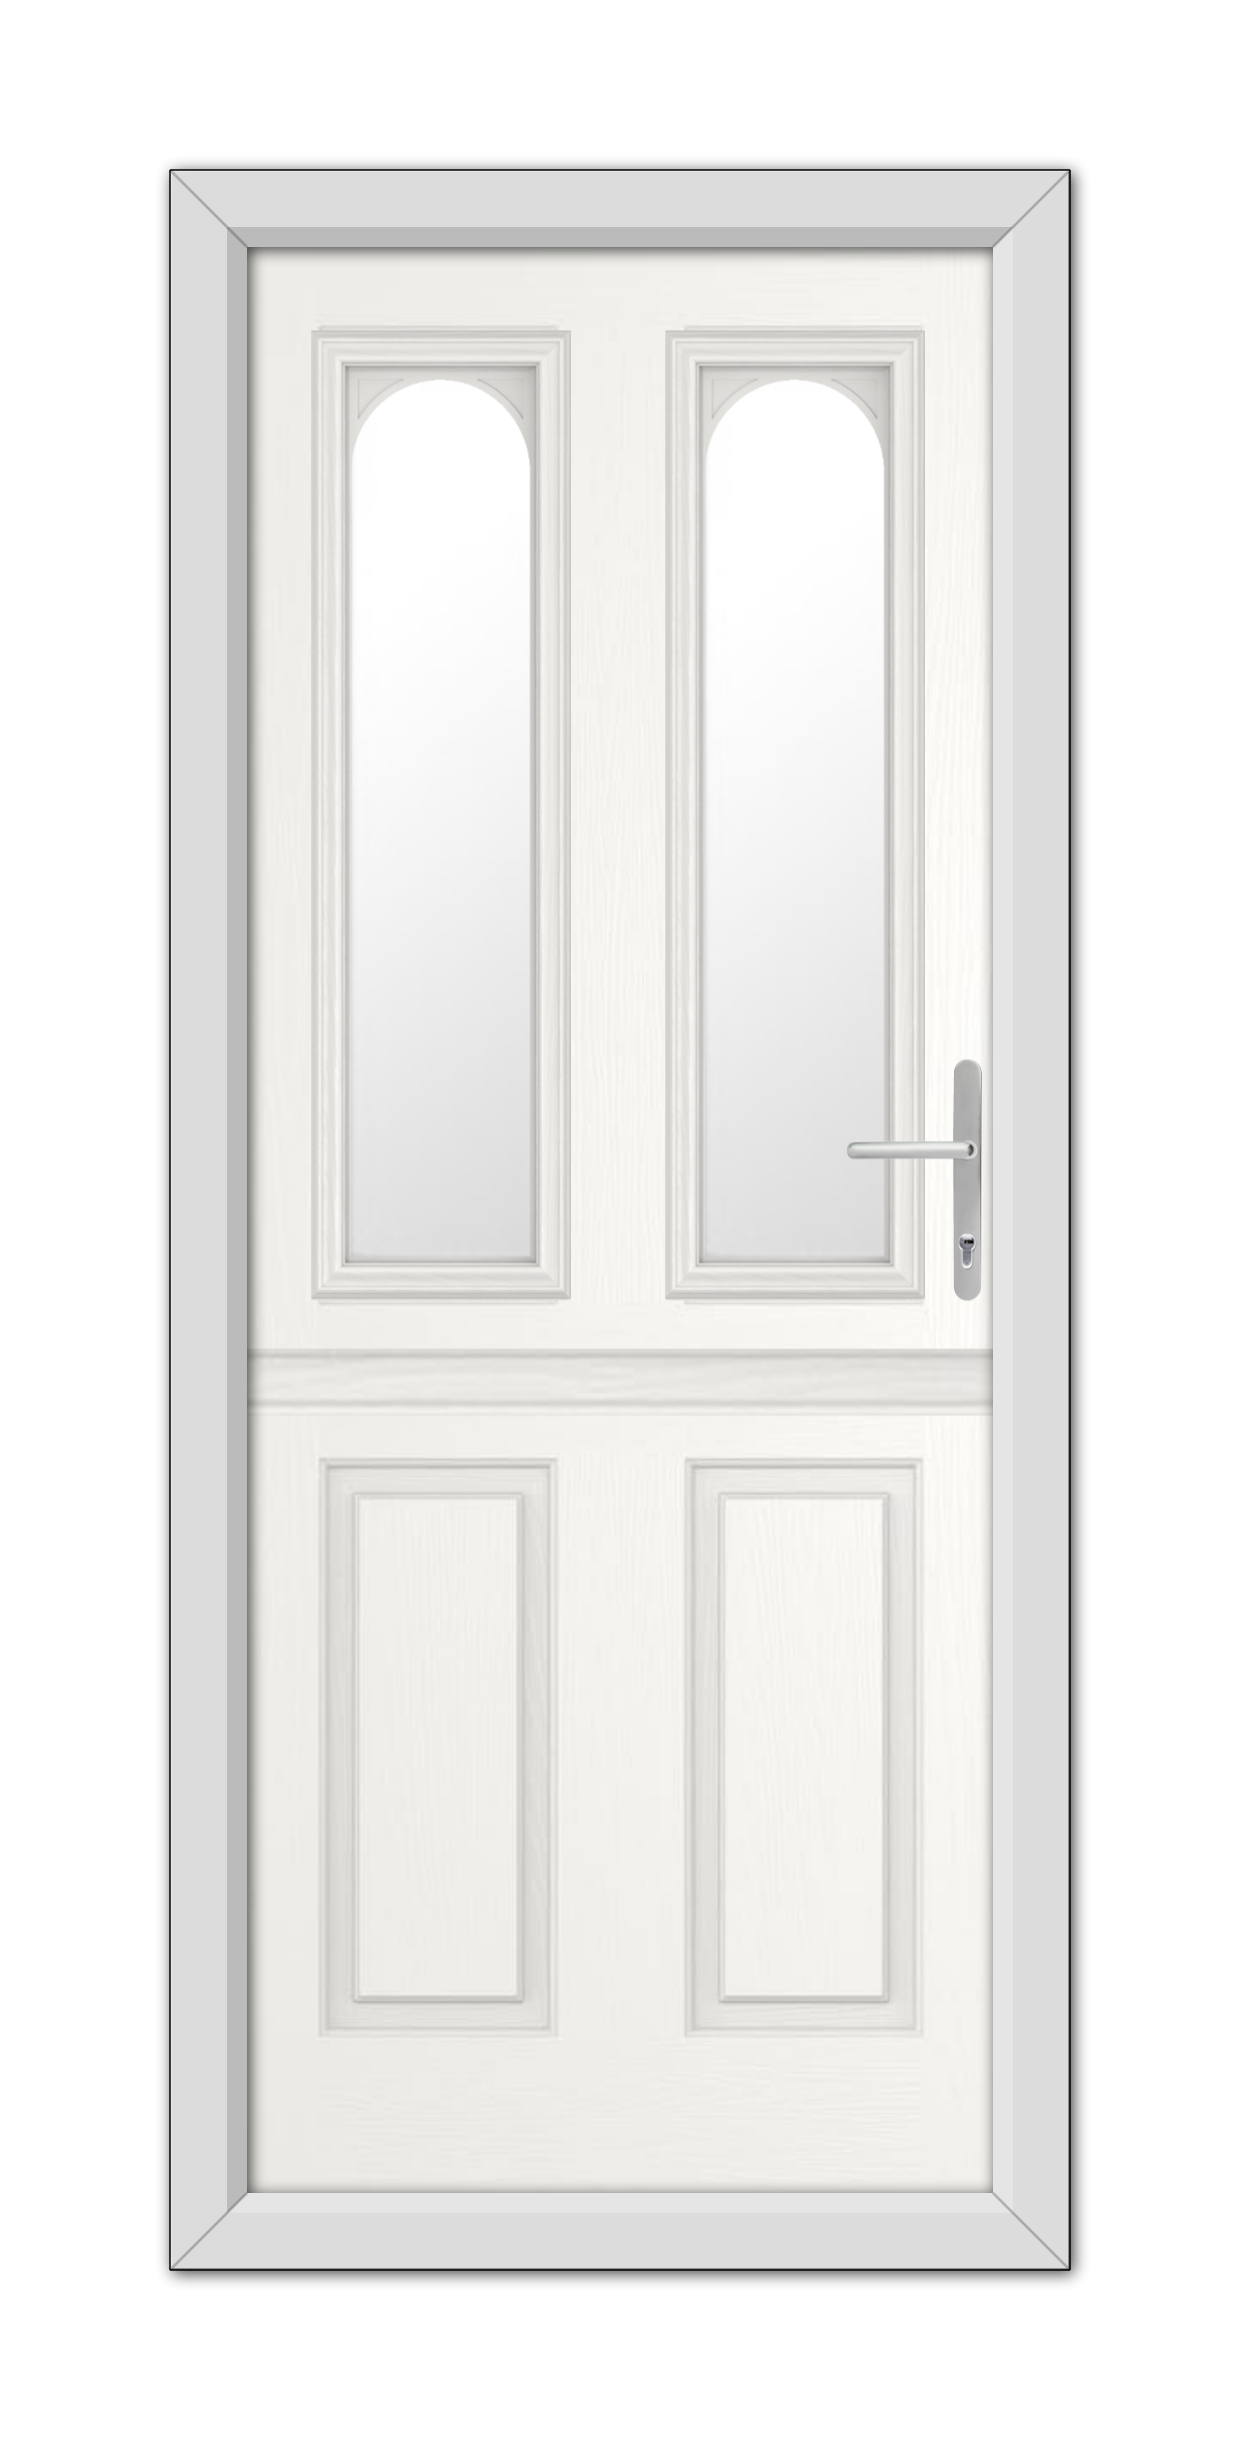 White Elmhurst Stable Composite Door 48mm Timber Core with rectangular glass panels on top, solid panels on the bottom, and a metallic handle on the right.